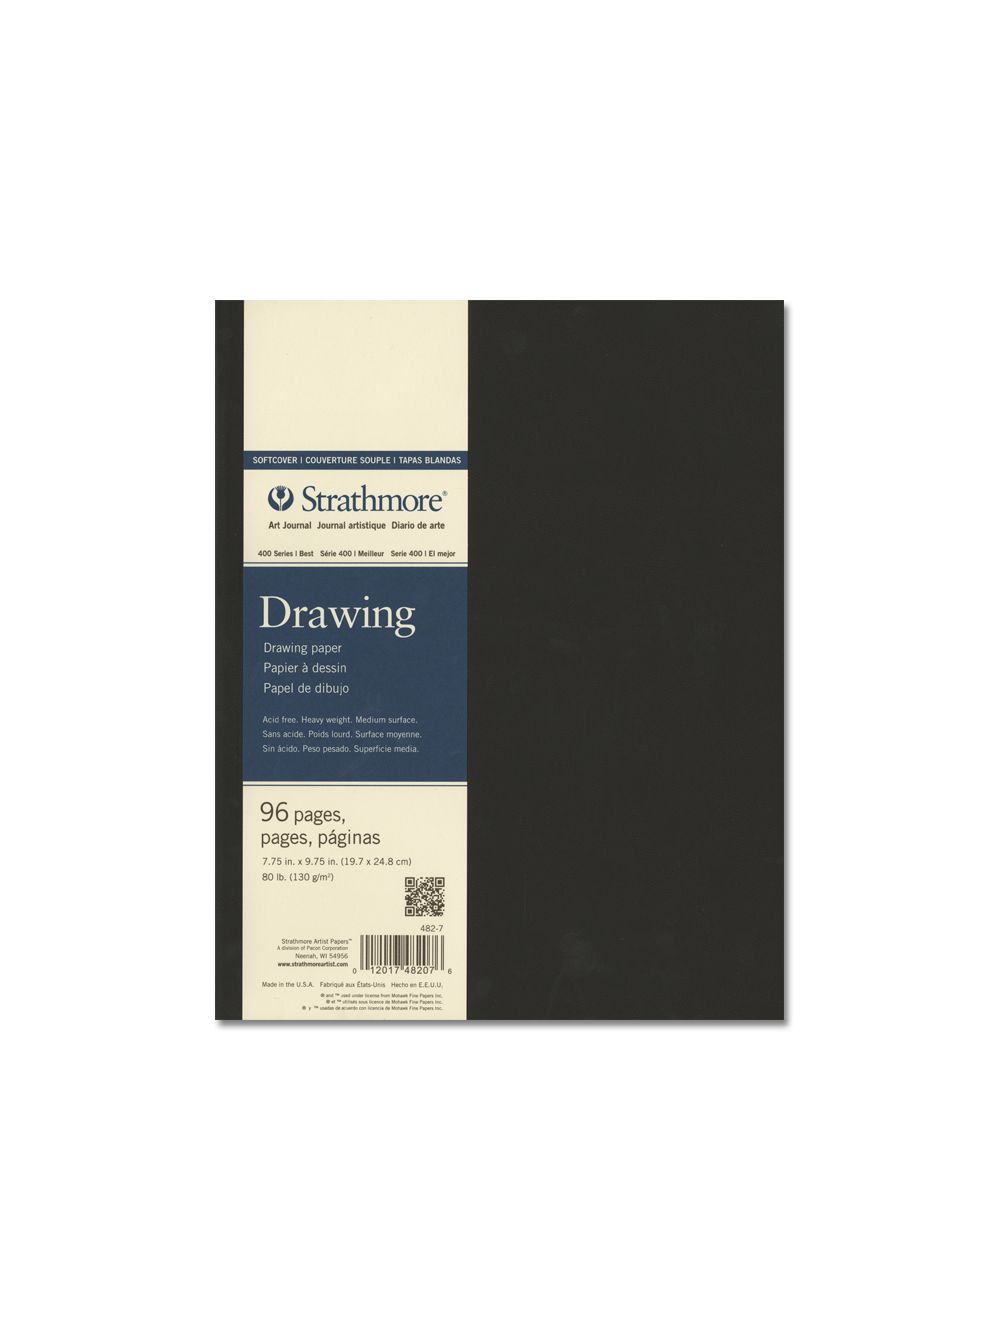 Strathmore Softcover Watercolor Journal 7.75x9.75